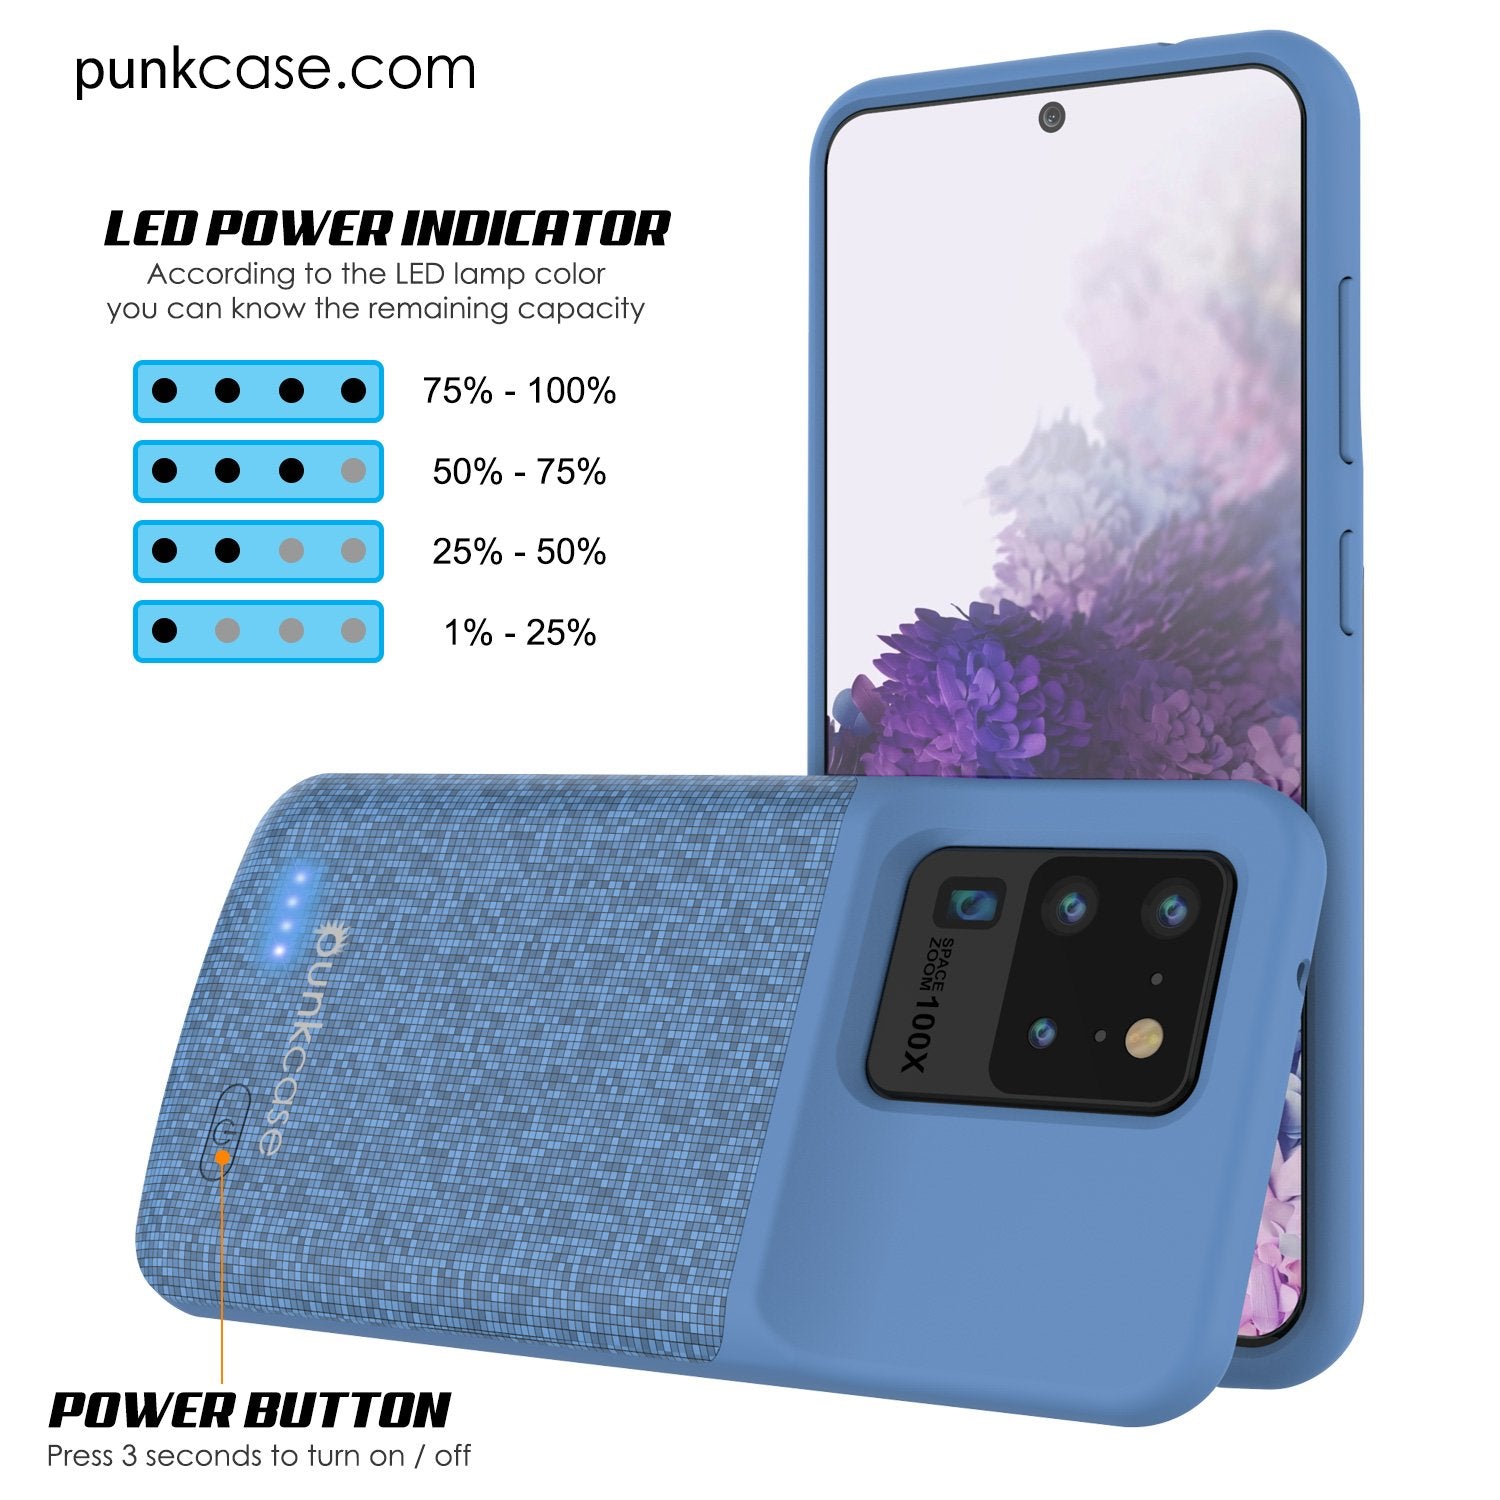 PunkJuice S20 Ultra Battery Case Patterned Blue - Fast Charging Power Juice Bank with 6000mAh